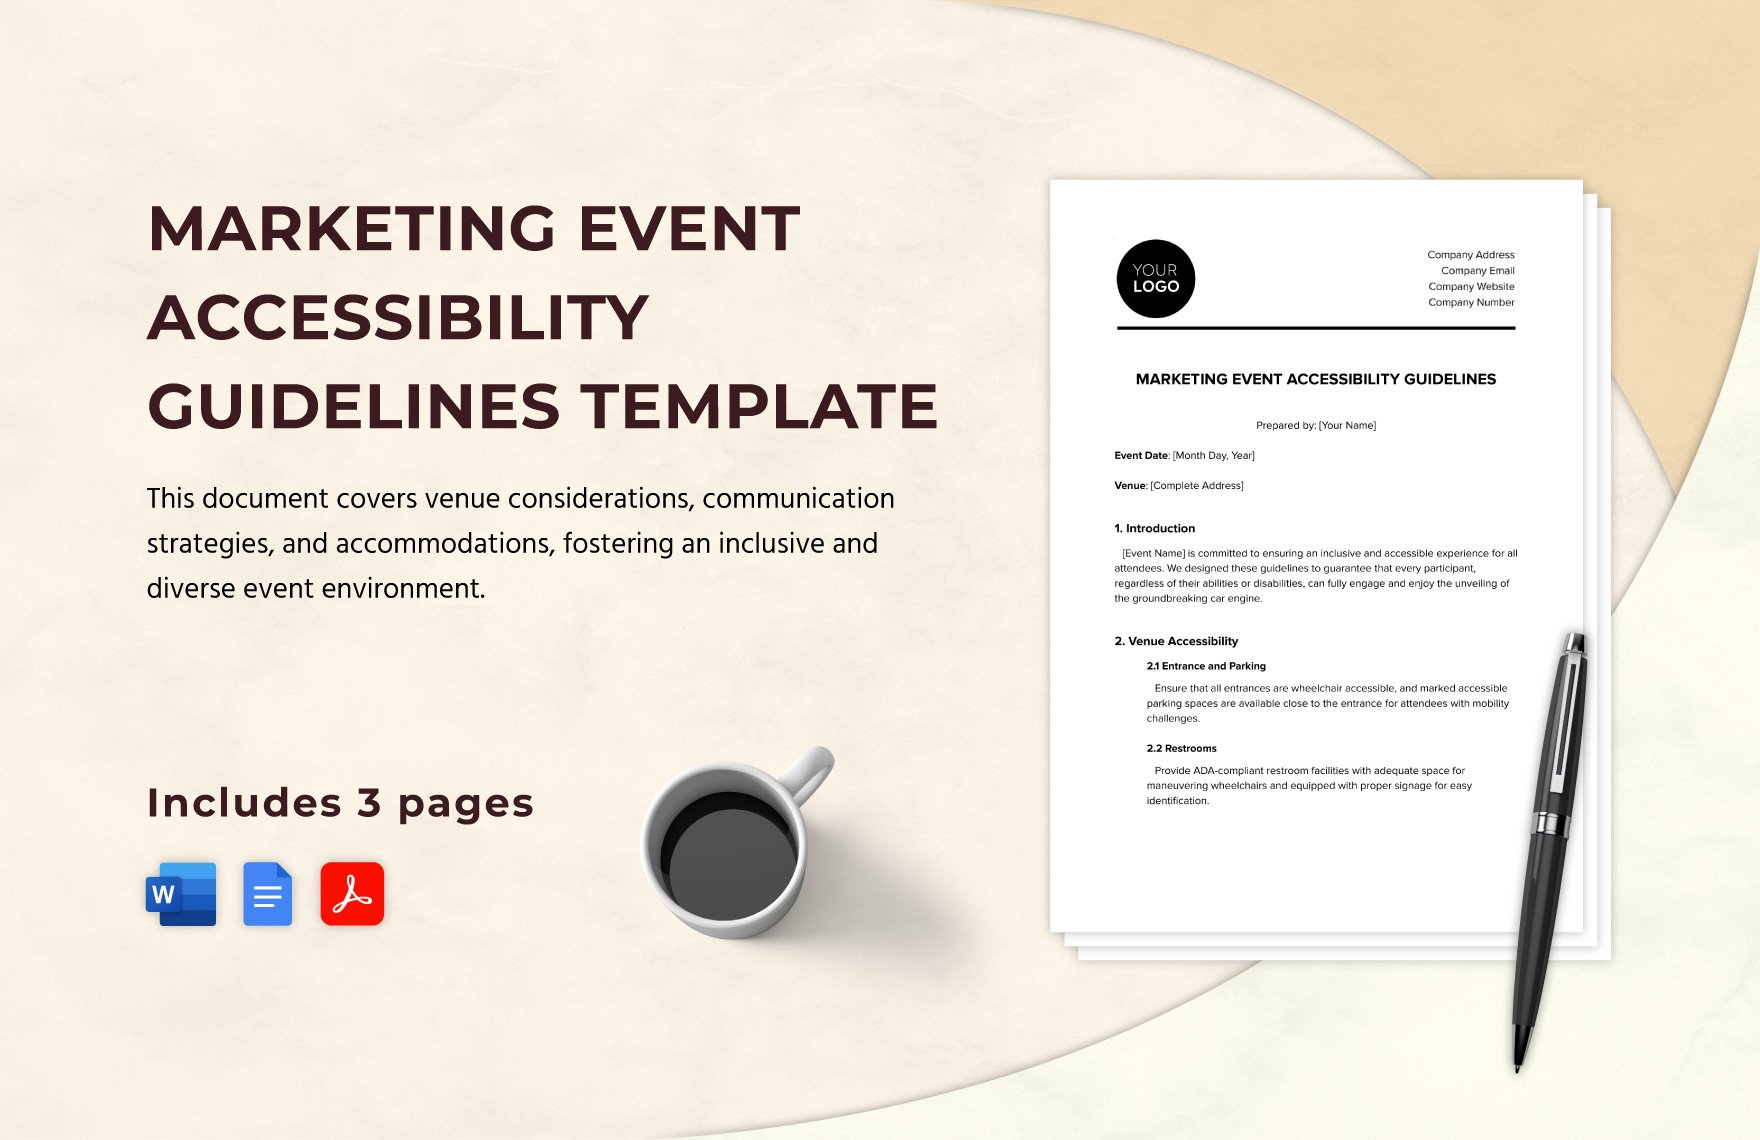 Marketing Event Accessibility Guidelines Template in Word, Google Docs, PDF